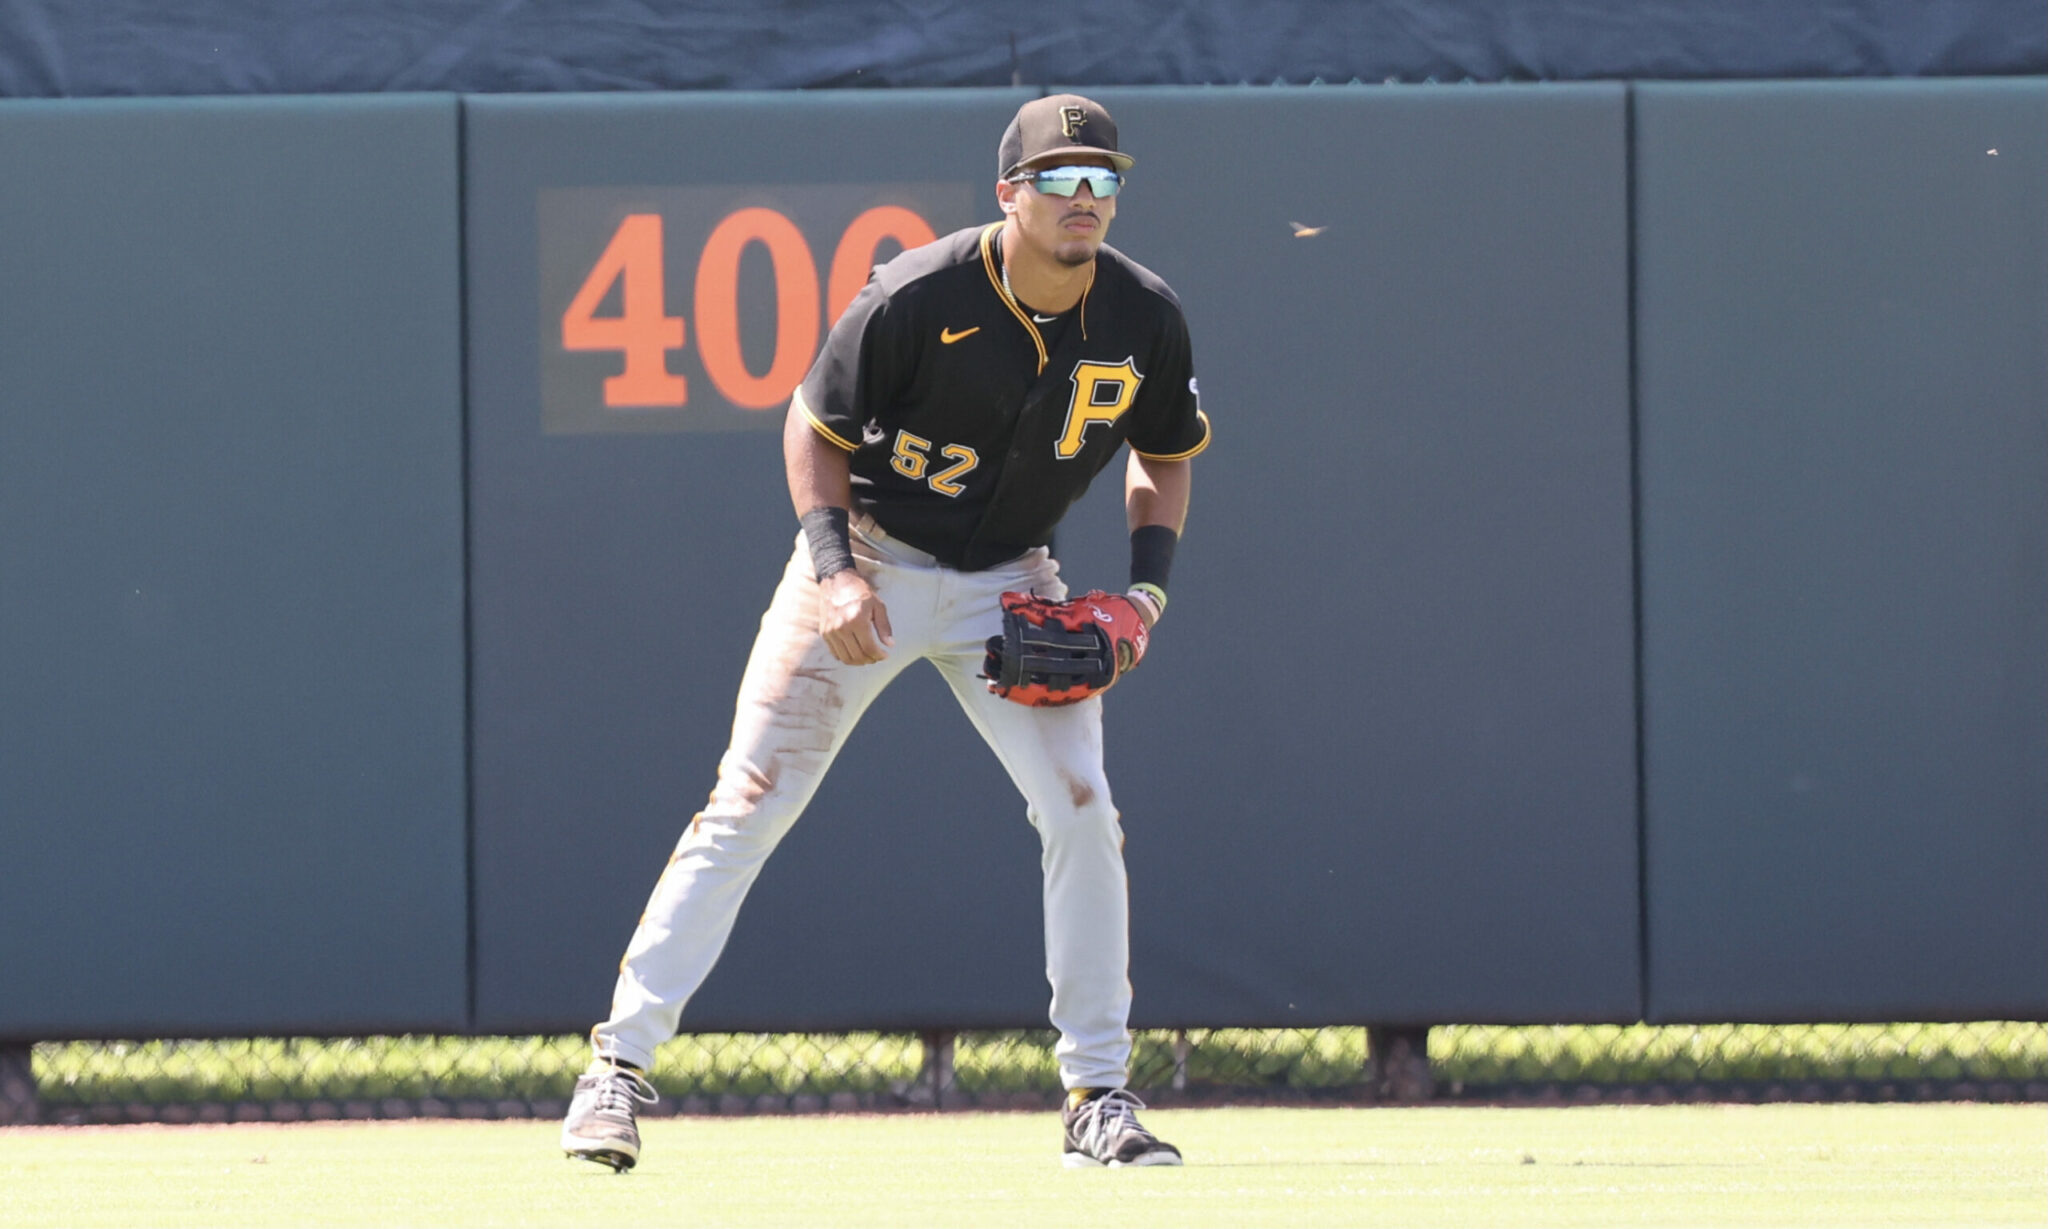 Pirates Prospect Watch: Lonnie White’s Three Homers Led the Way Last Week